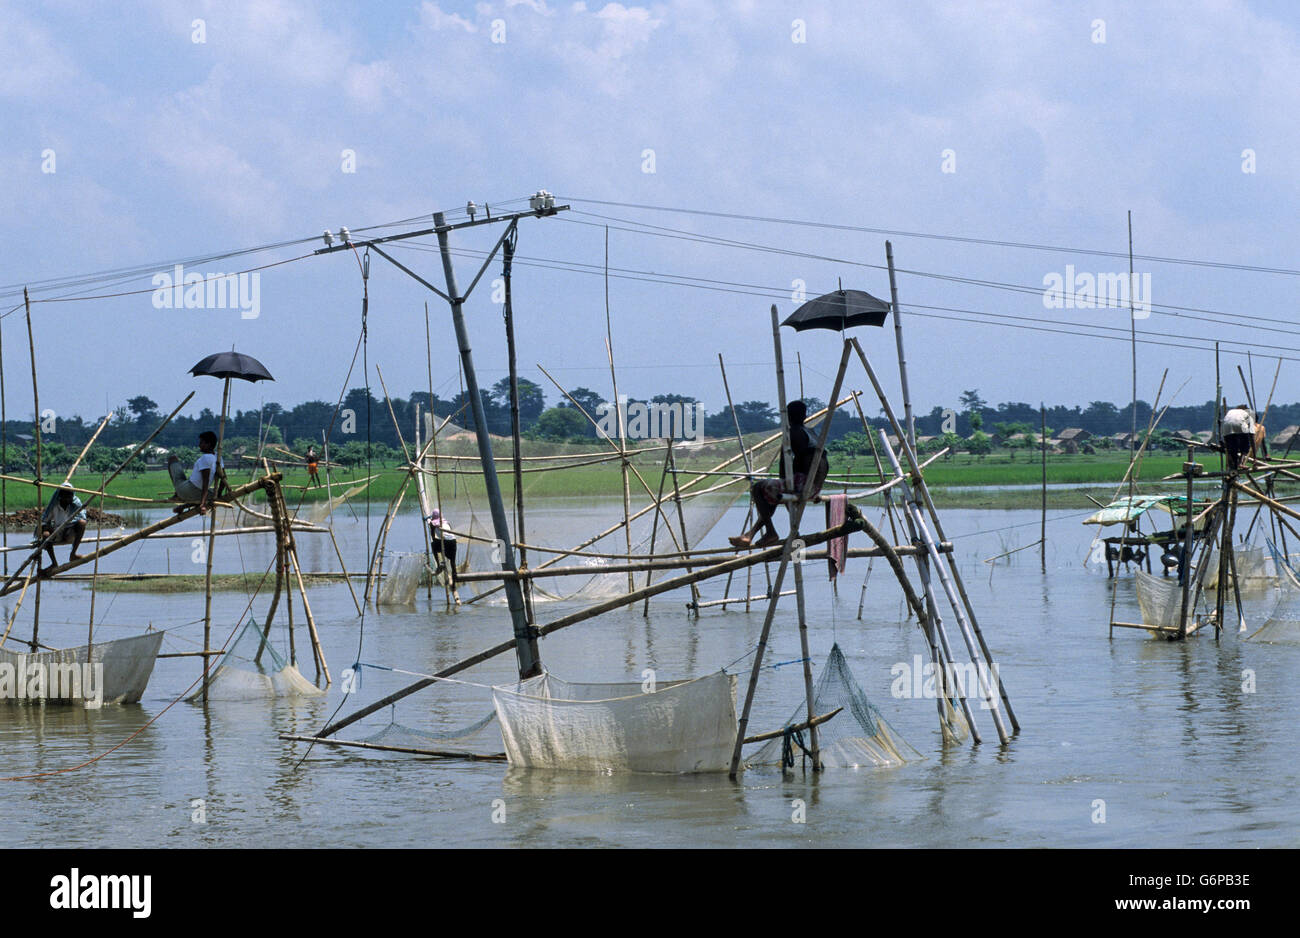 INDIA Bihar, submergence at Bagmati river a branch of Ganges / Ganga River due to heavy monsoon rains and melting Himalaya glaciers, people fishing on temporary bamboo construction, fishing net Stock Photo